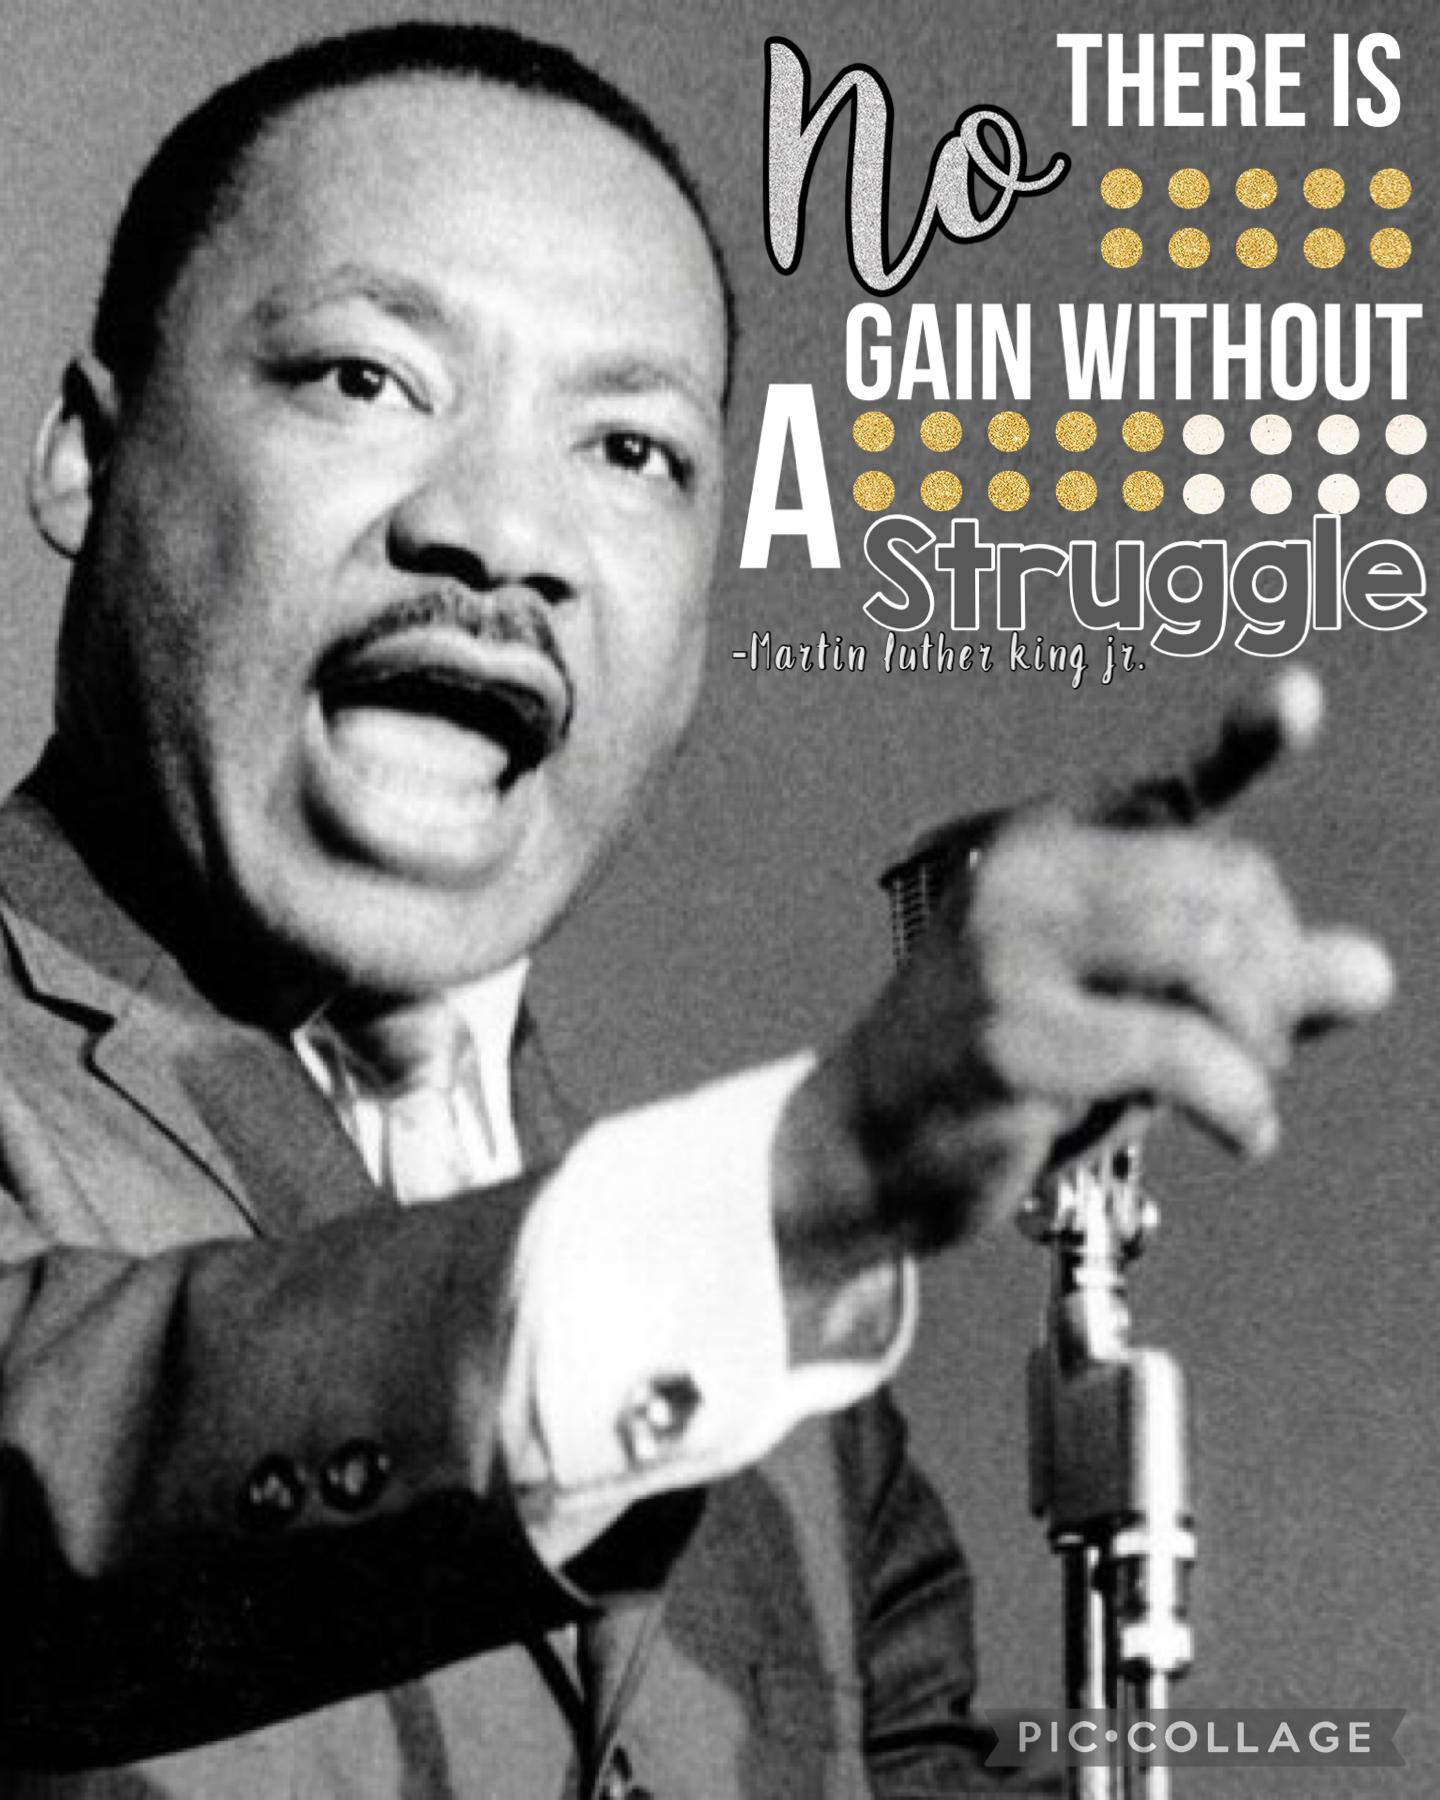 Happy Martín luther king jr day!!